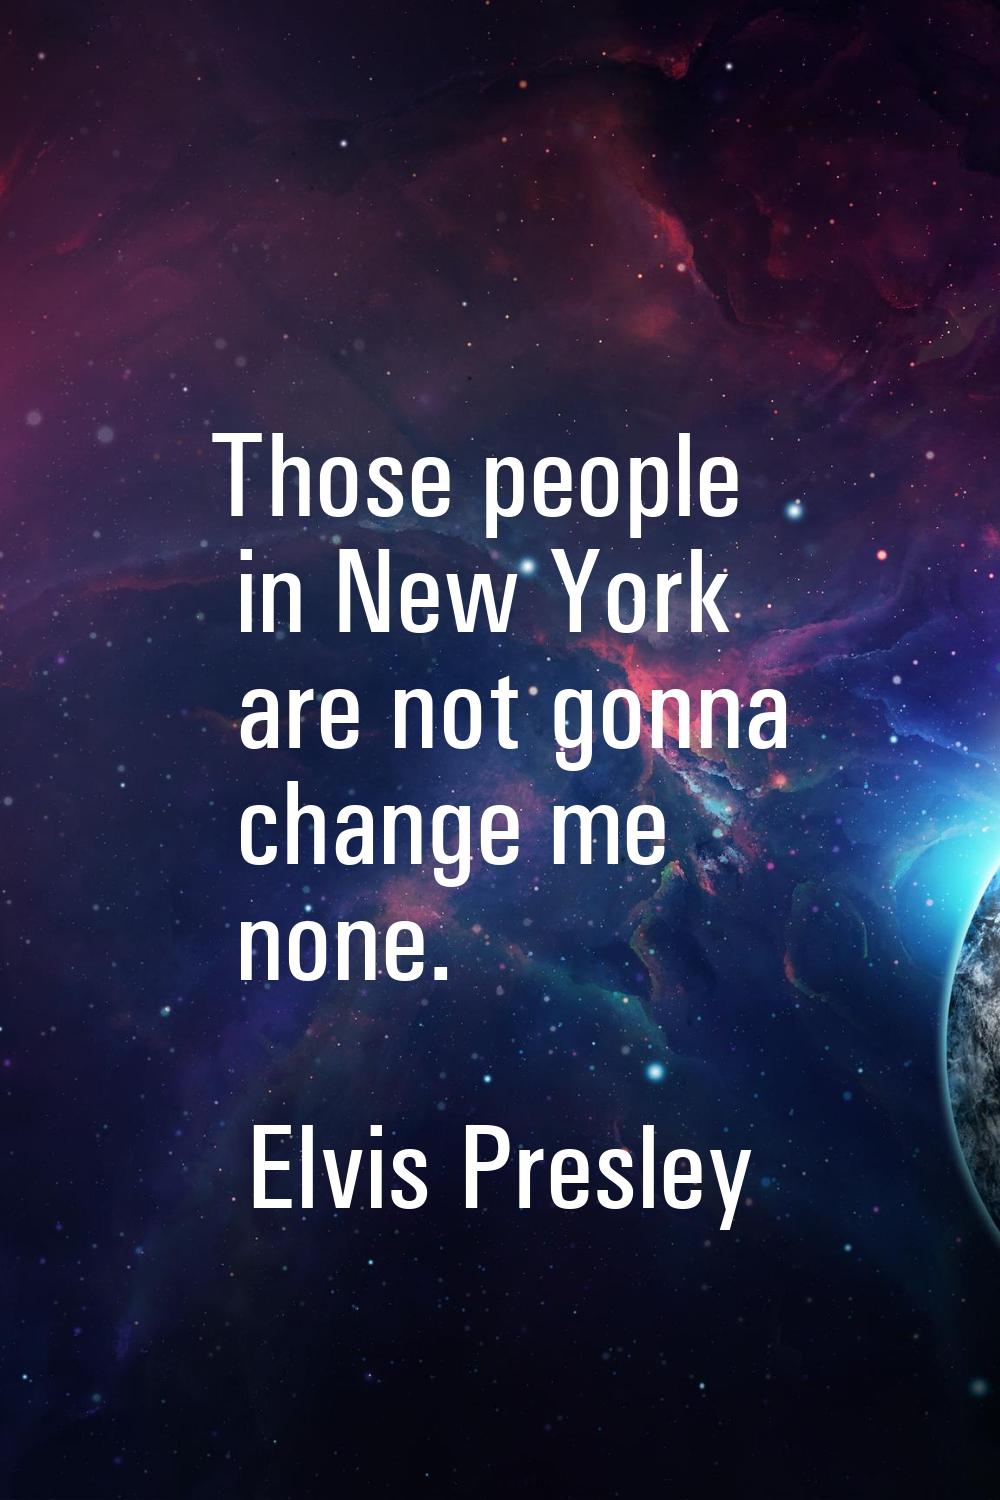 Those people in New York are not gonna change me none.